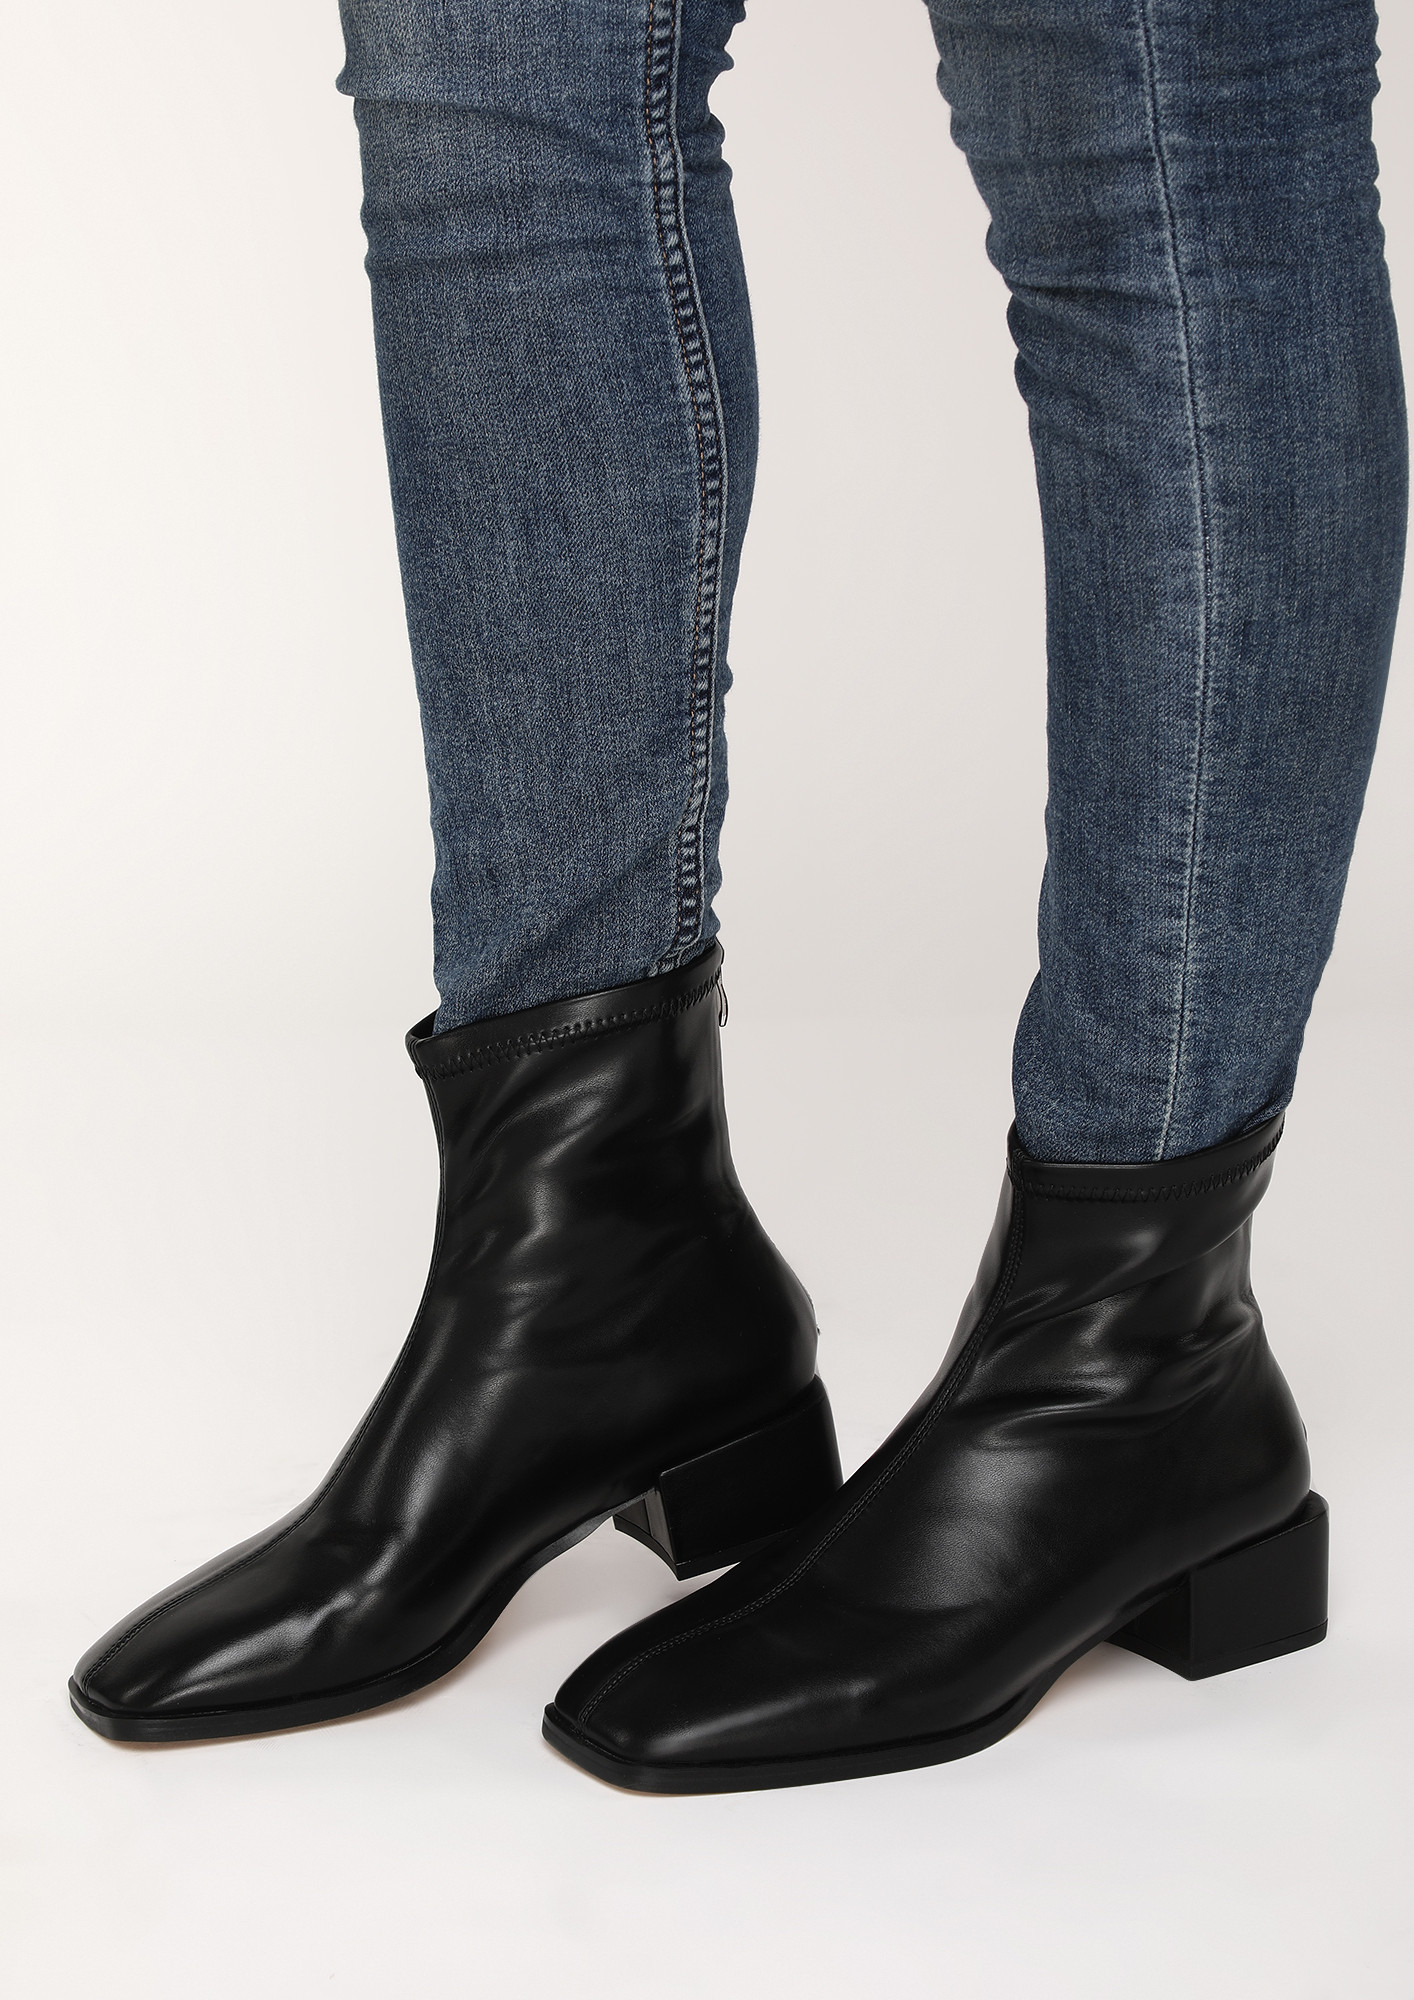 PERFECT FOR EVERYDAY BLACK BOOTS